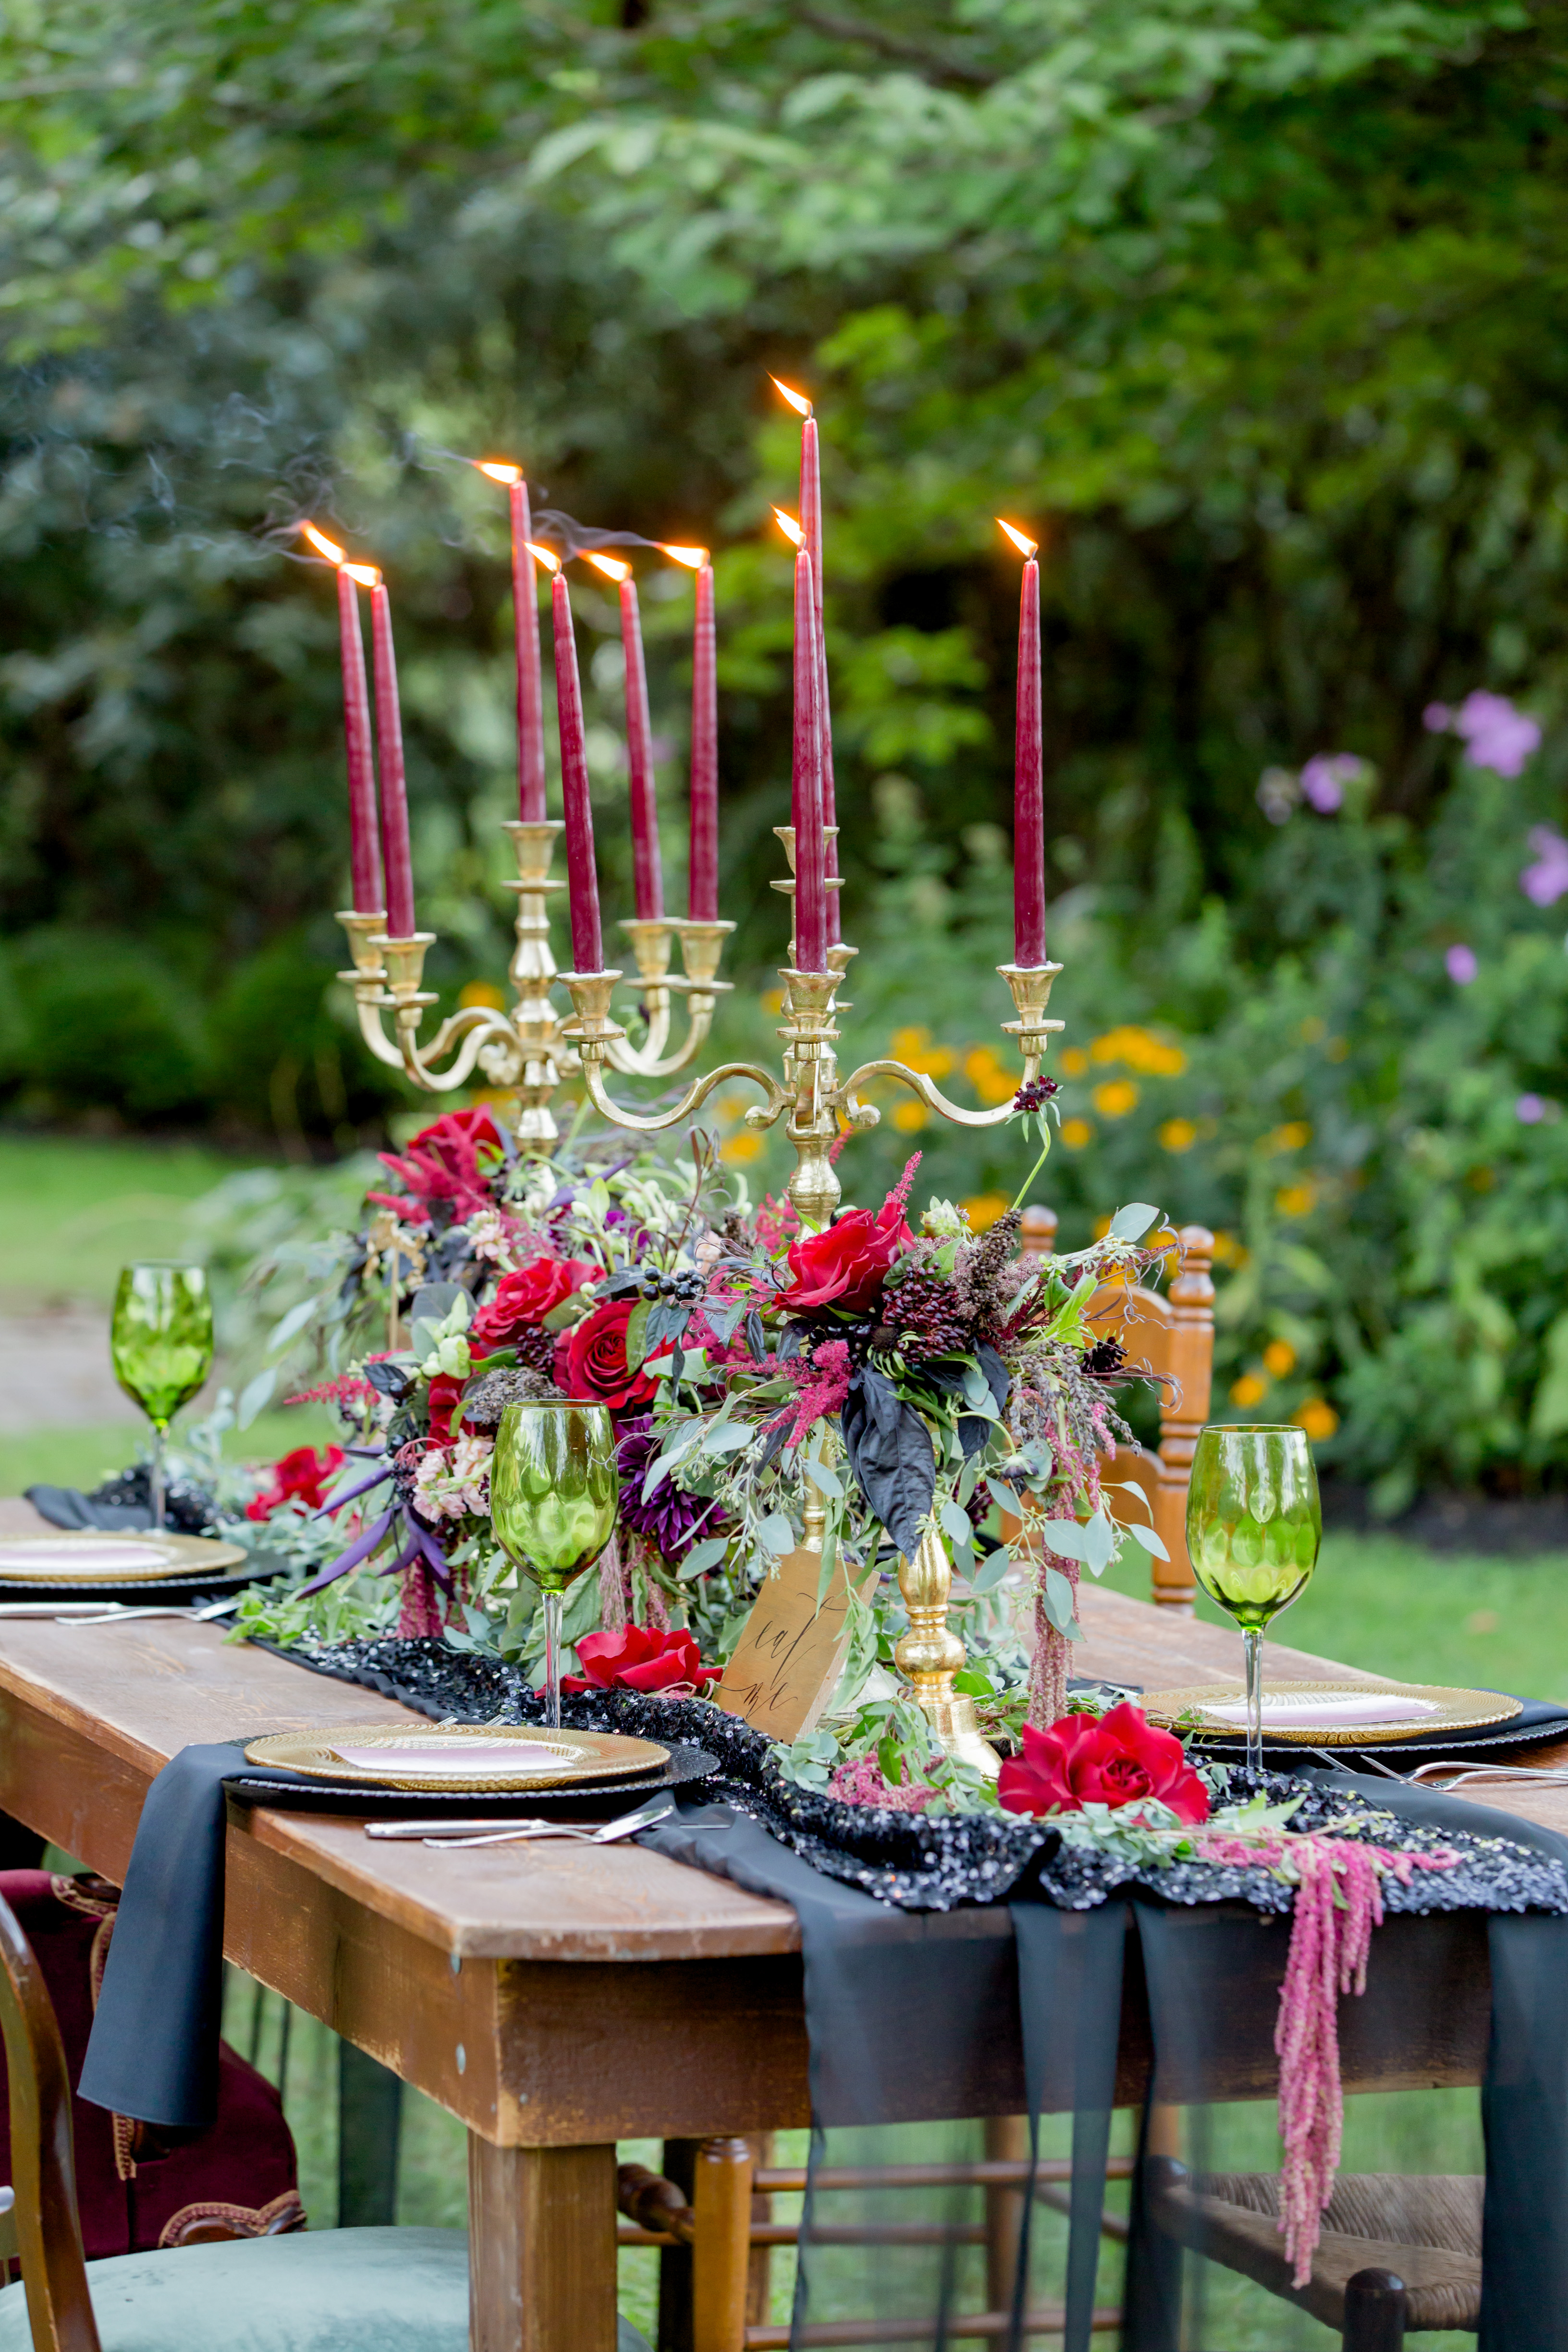 This jaw-dropping wedding reception table is perfect for the boho chic garden bride. Get inspired for your garden wedding with ideas on our blog!